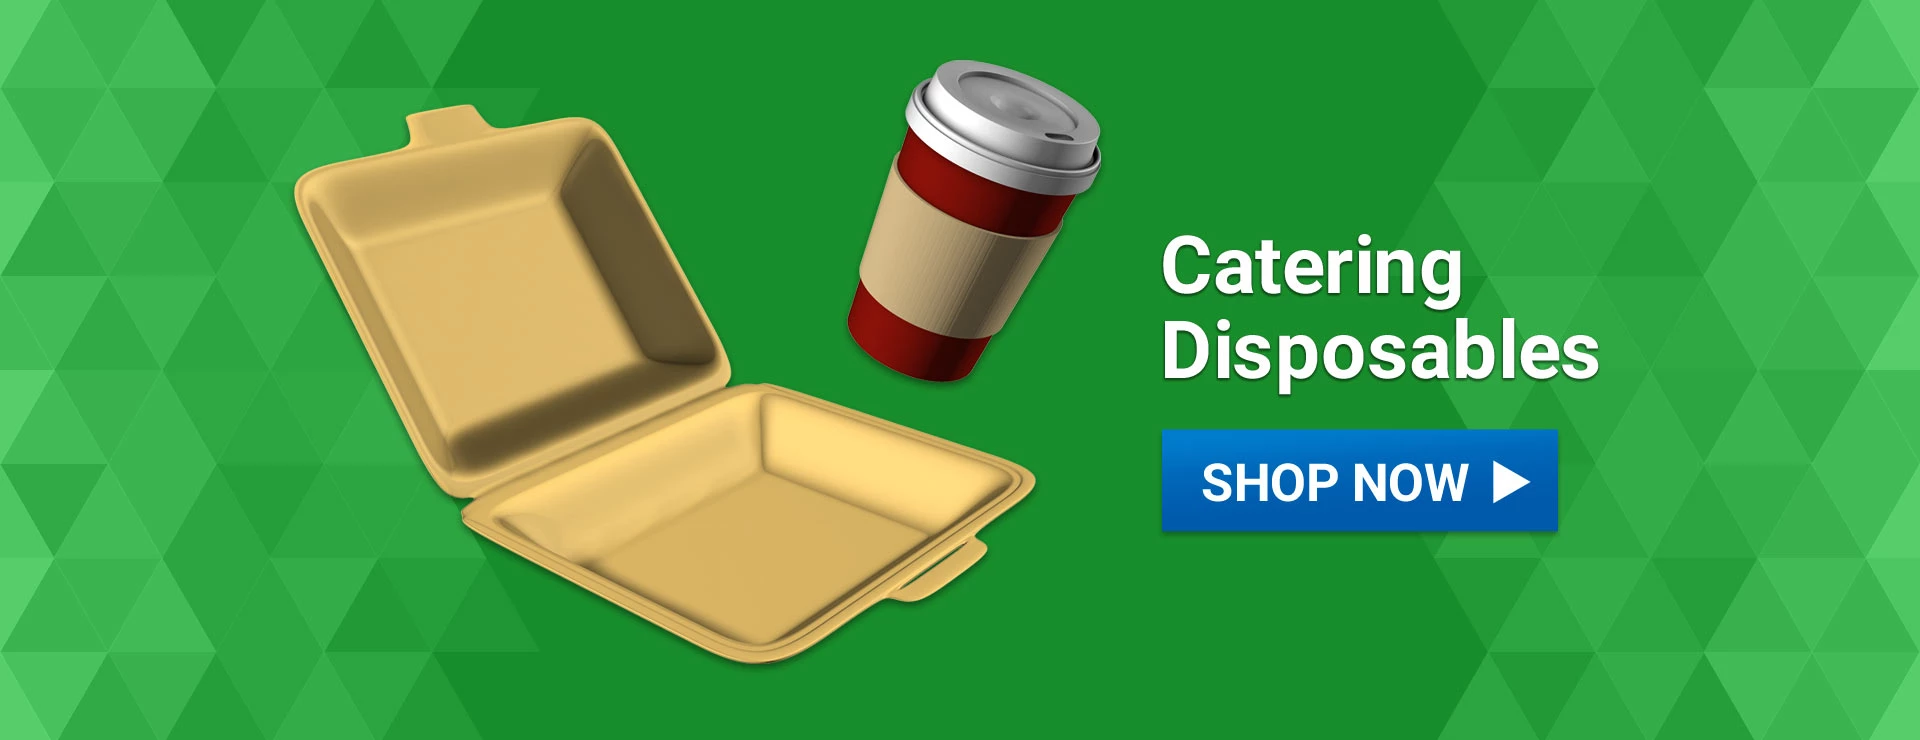 Alliance UK Online Catering Disposables